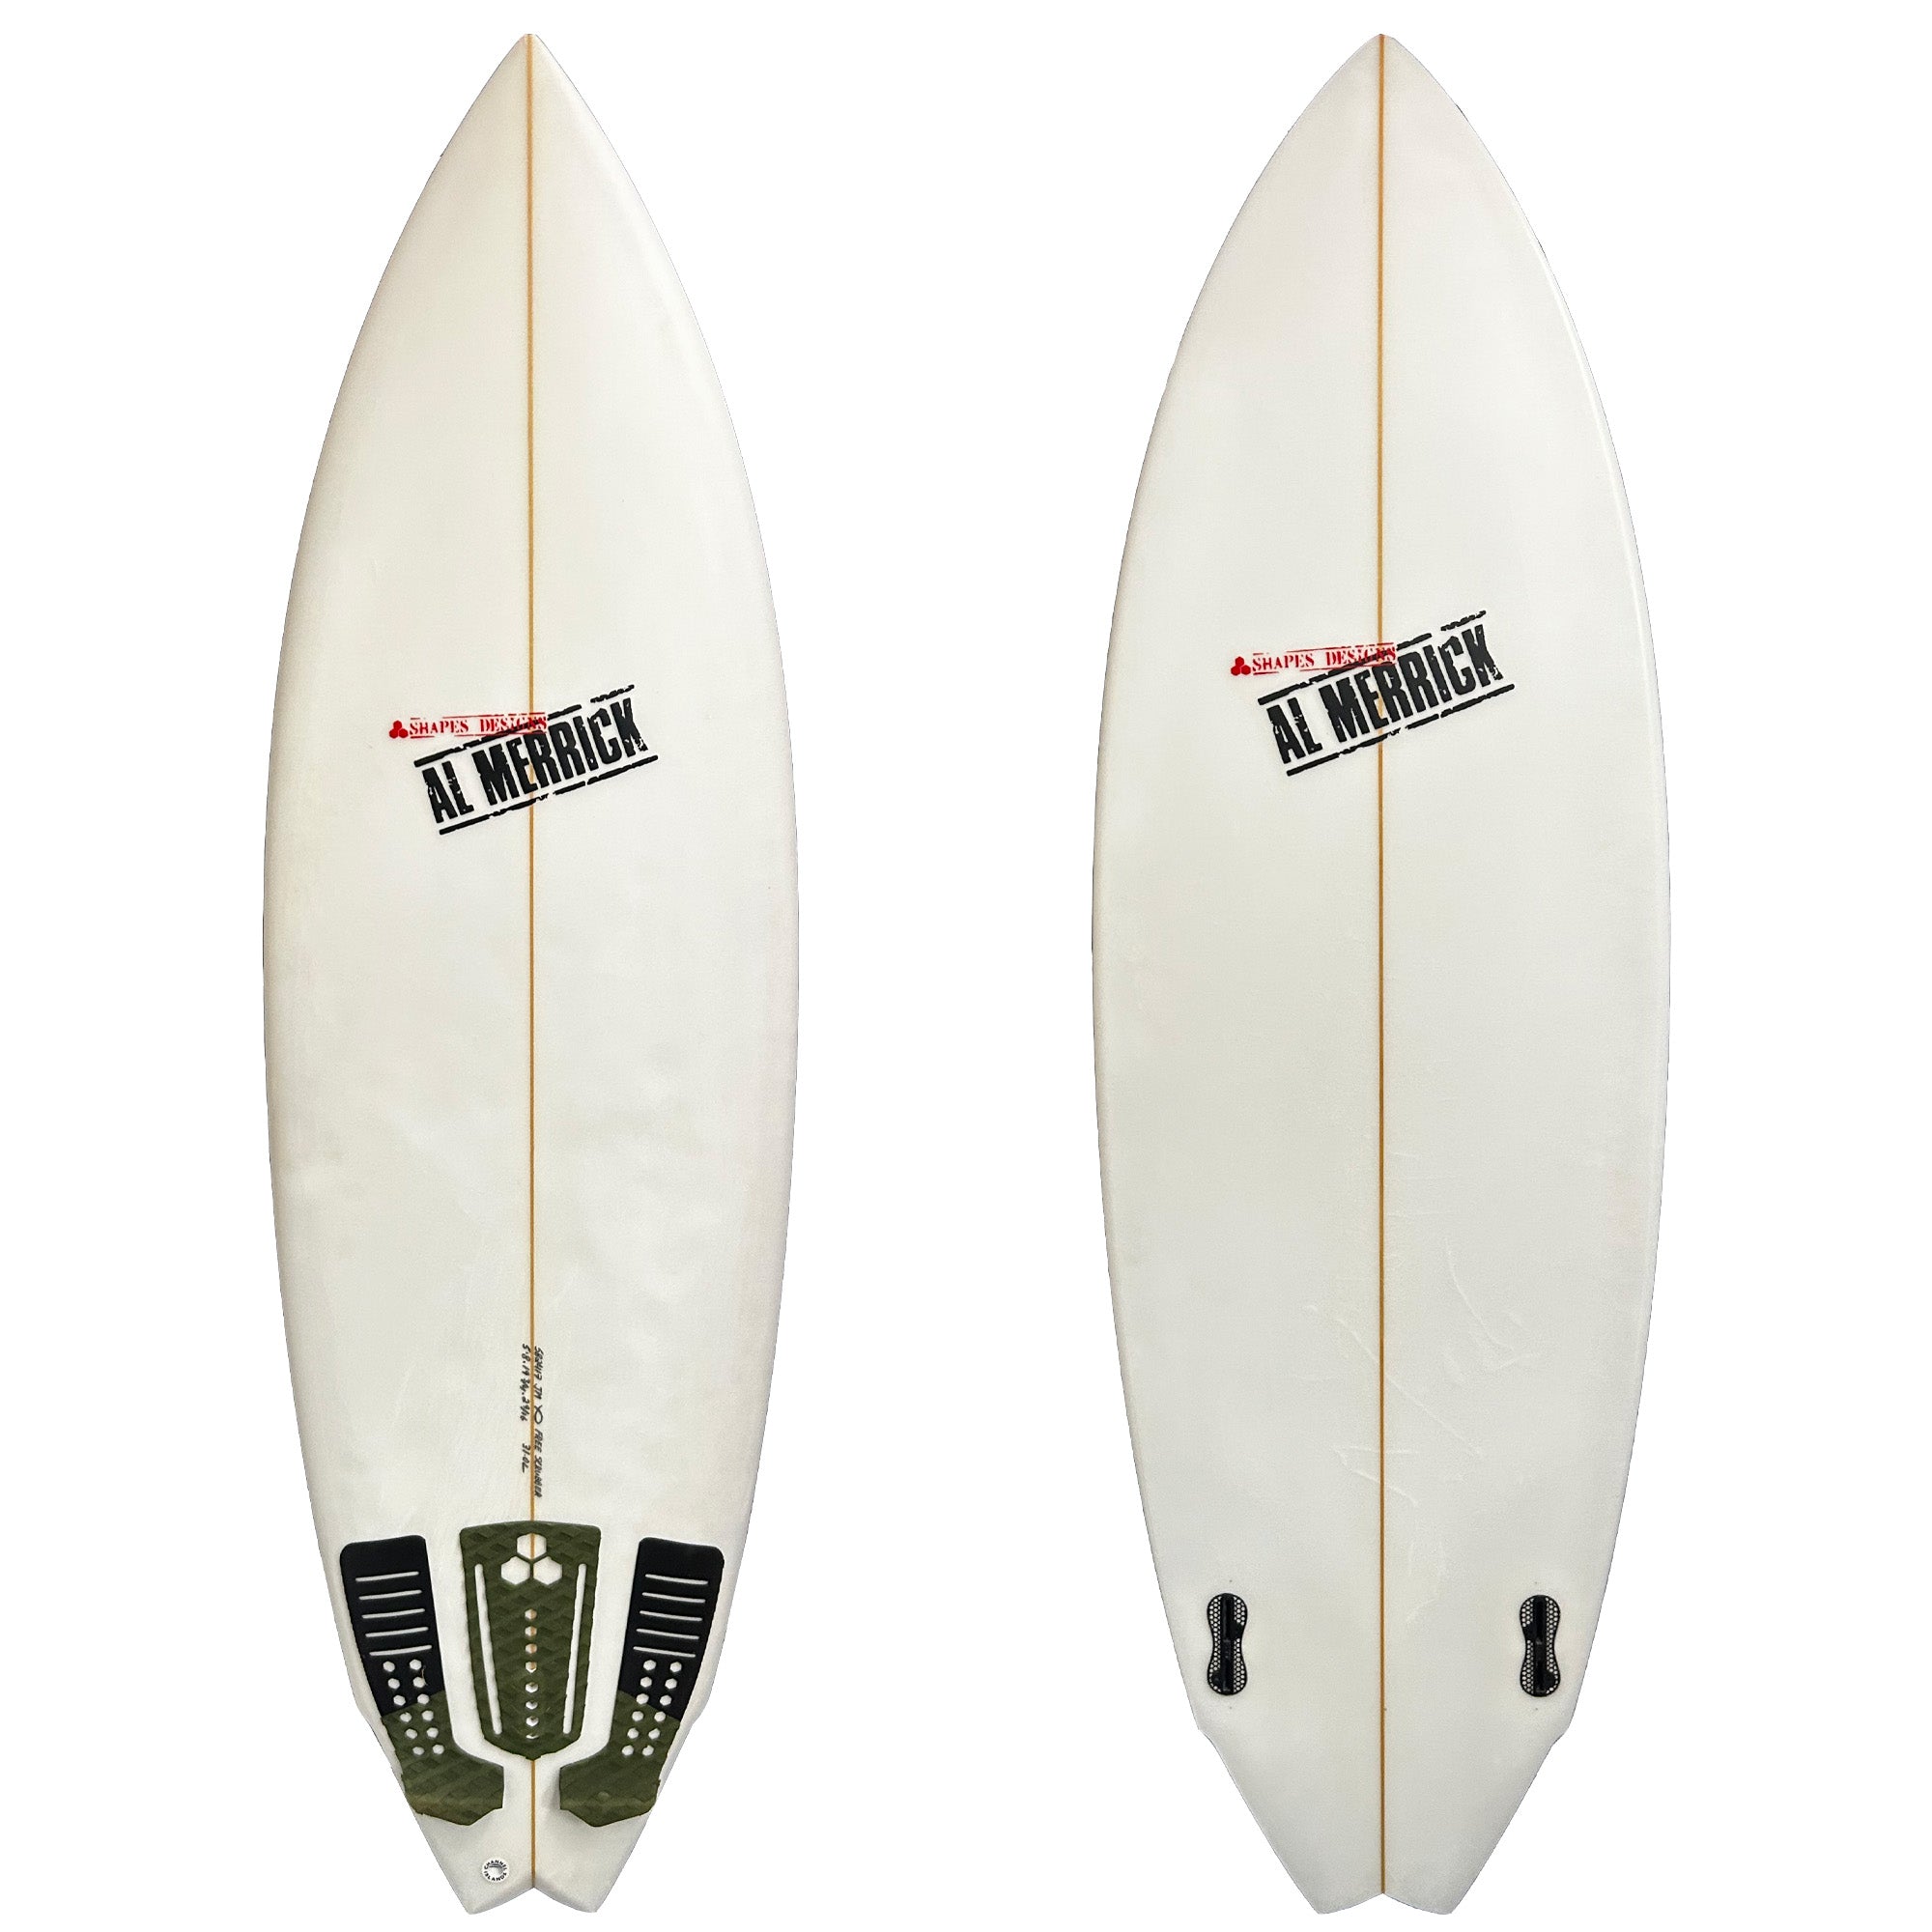 Channel Islands Free Scrubber 5'8 Consignment Surfboard